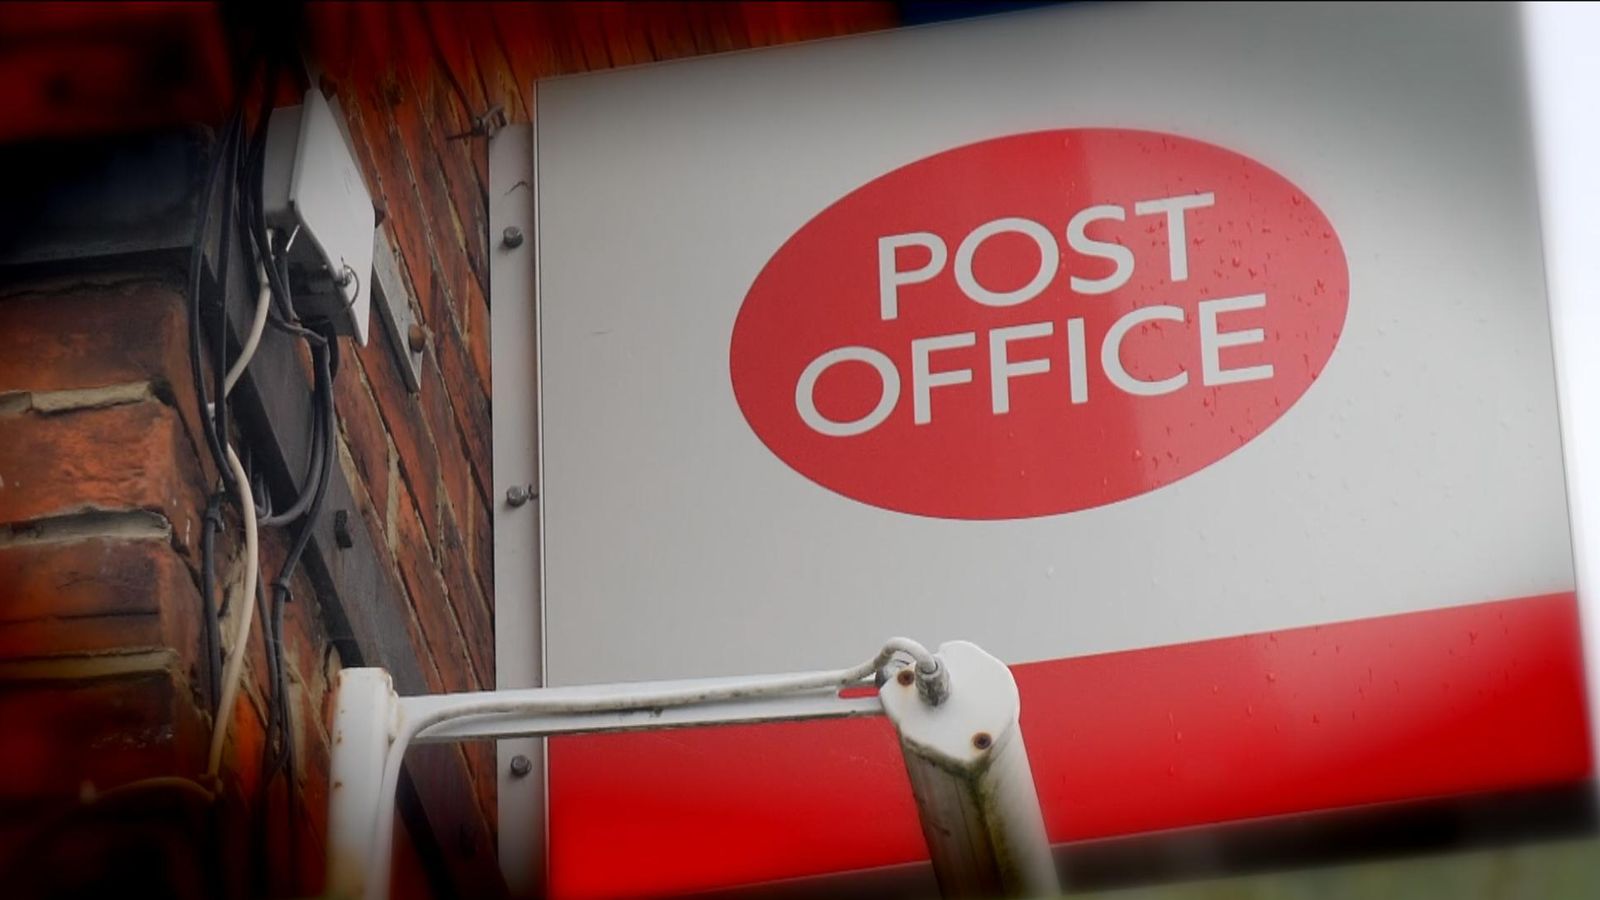 new post office scandal redress body 'would take months and cost millions', govt says